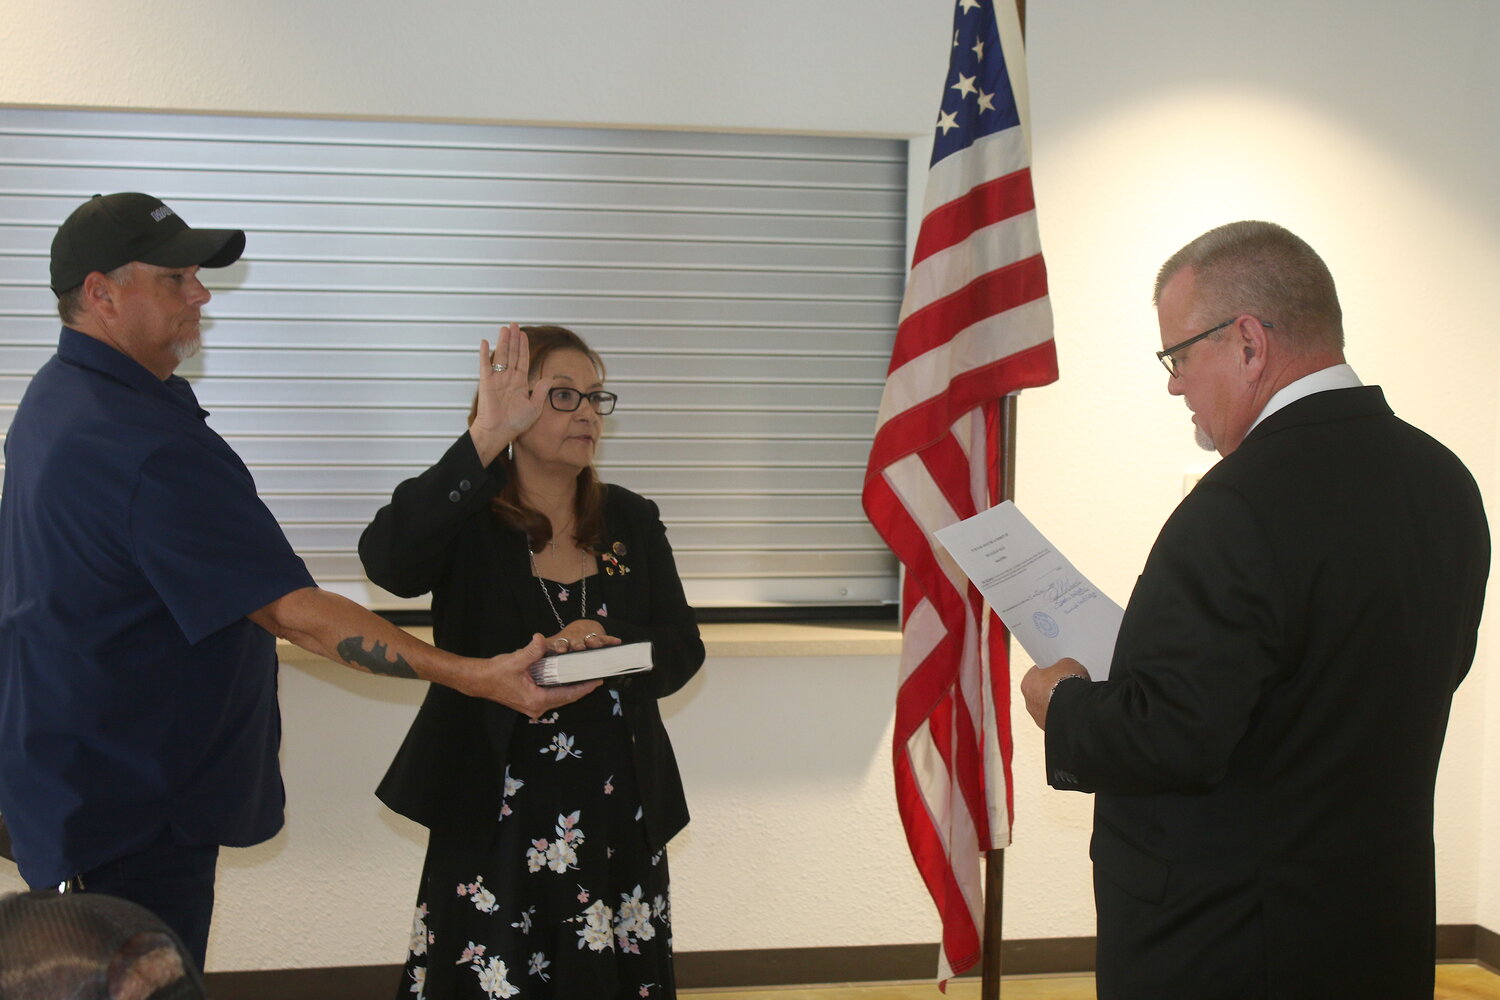 Nixon Municipal Judge and Precinct 4 JP Darryl Becker administers the oath of office to incoming City Council member Patsy Vigil Scherrer as she keeps her hand on a family Bible on Monday, June 5. Scherrer was elected last month and took her place on the council dais.